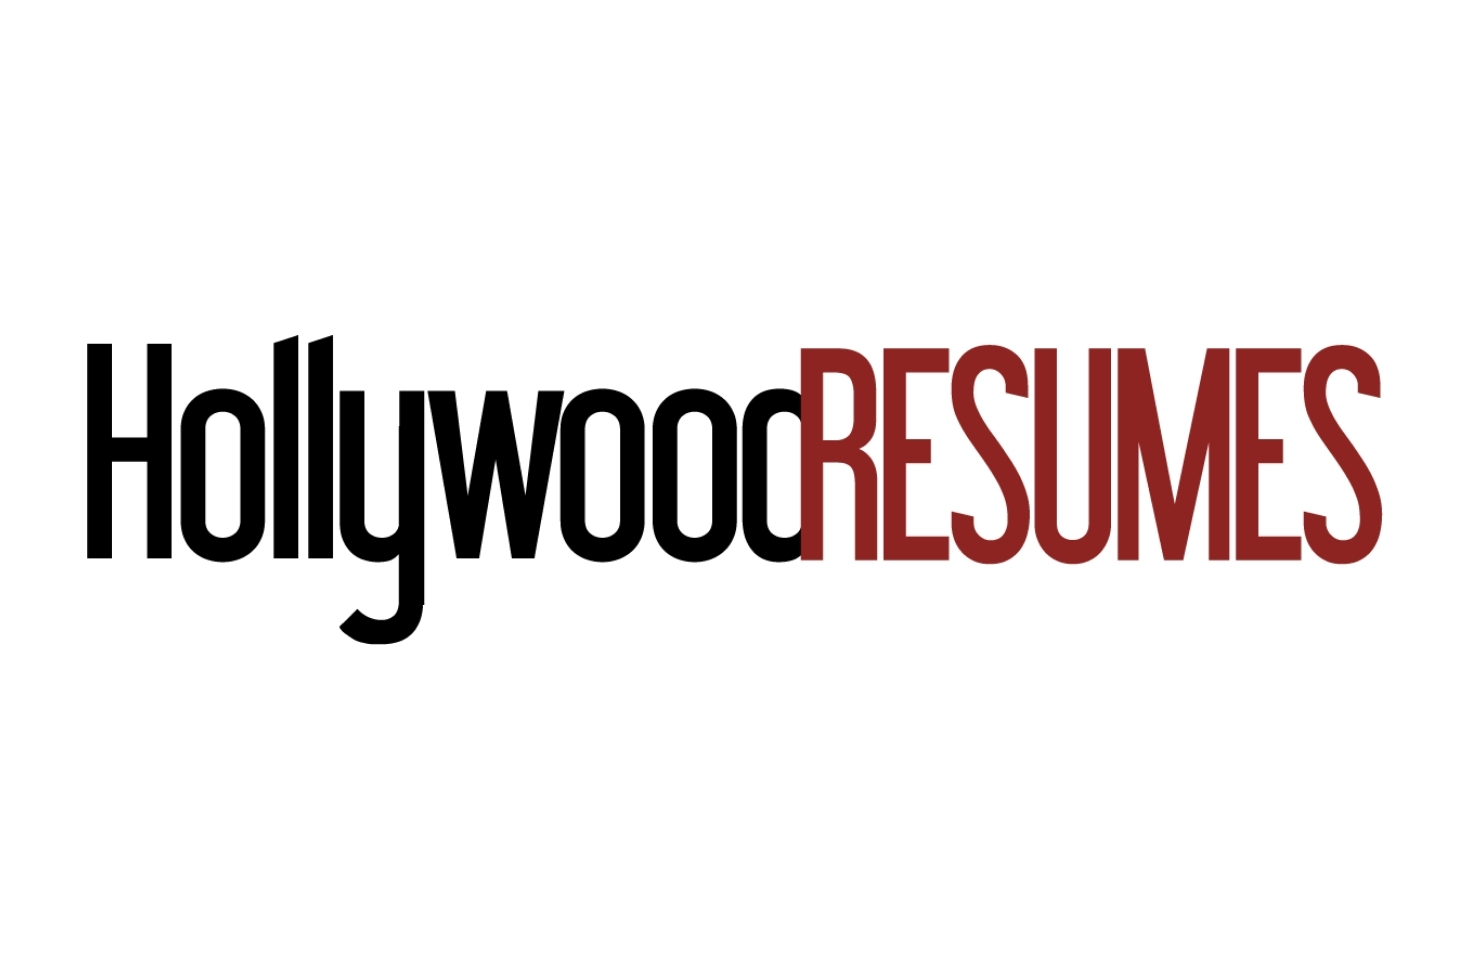 Text "Hollywood Resumes" in red and black